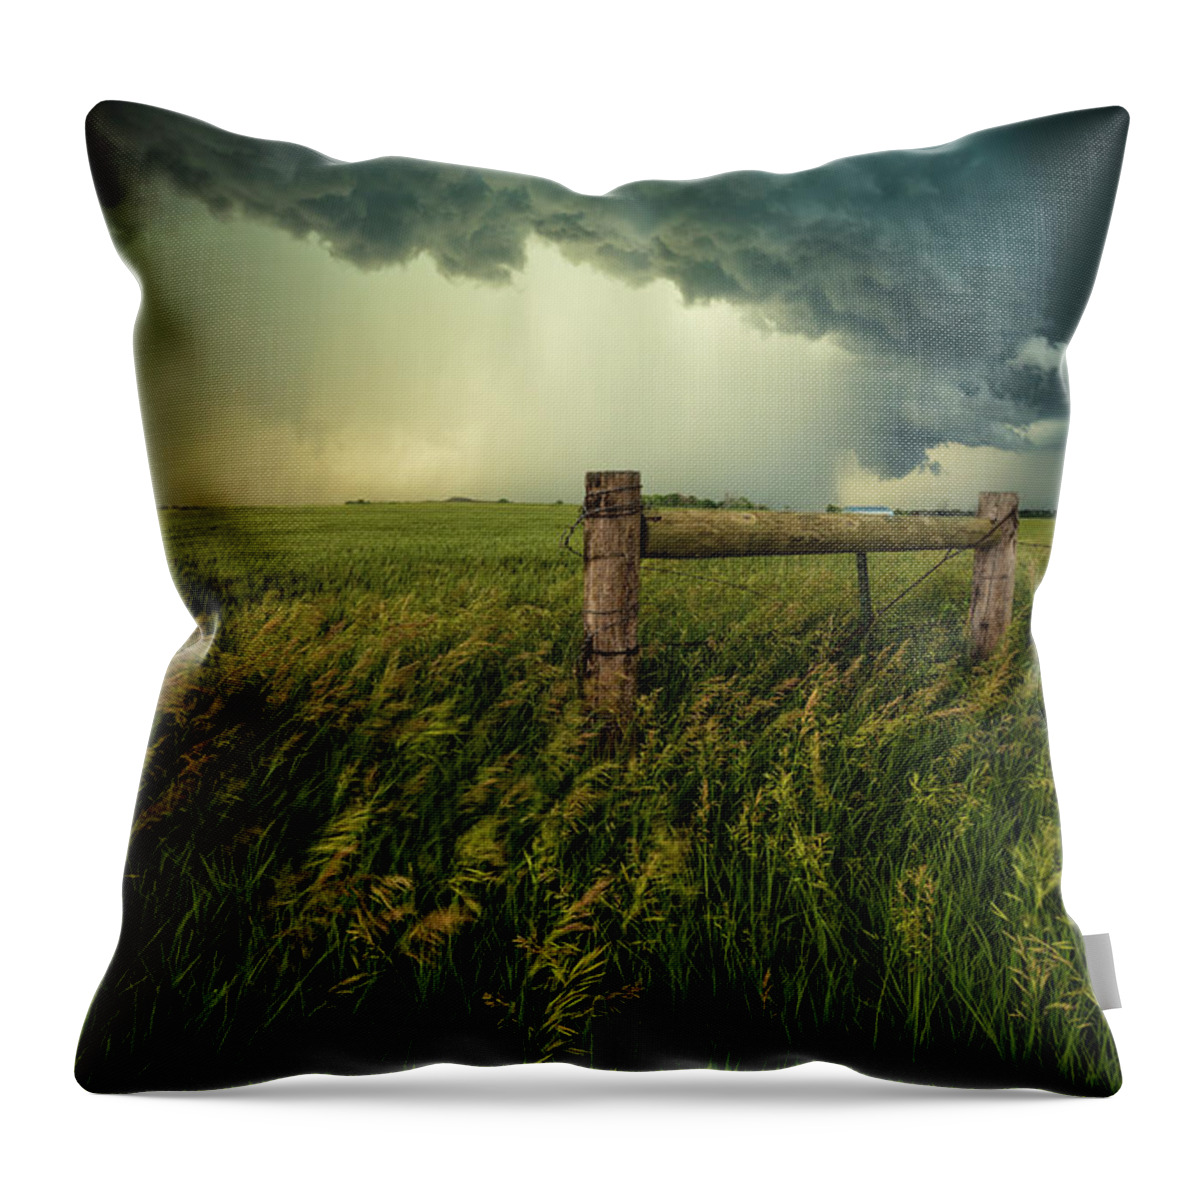 Shelf Cloud Throw Pillow featuring the photograph The Frayed Ends Of Sanity by Aaron J Groen